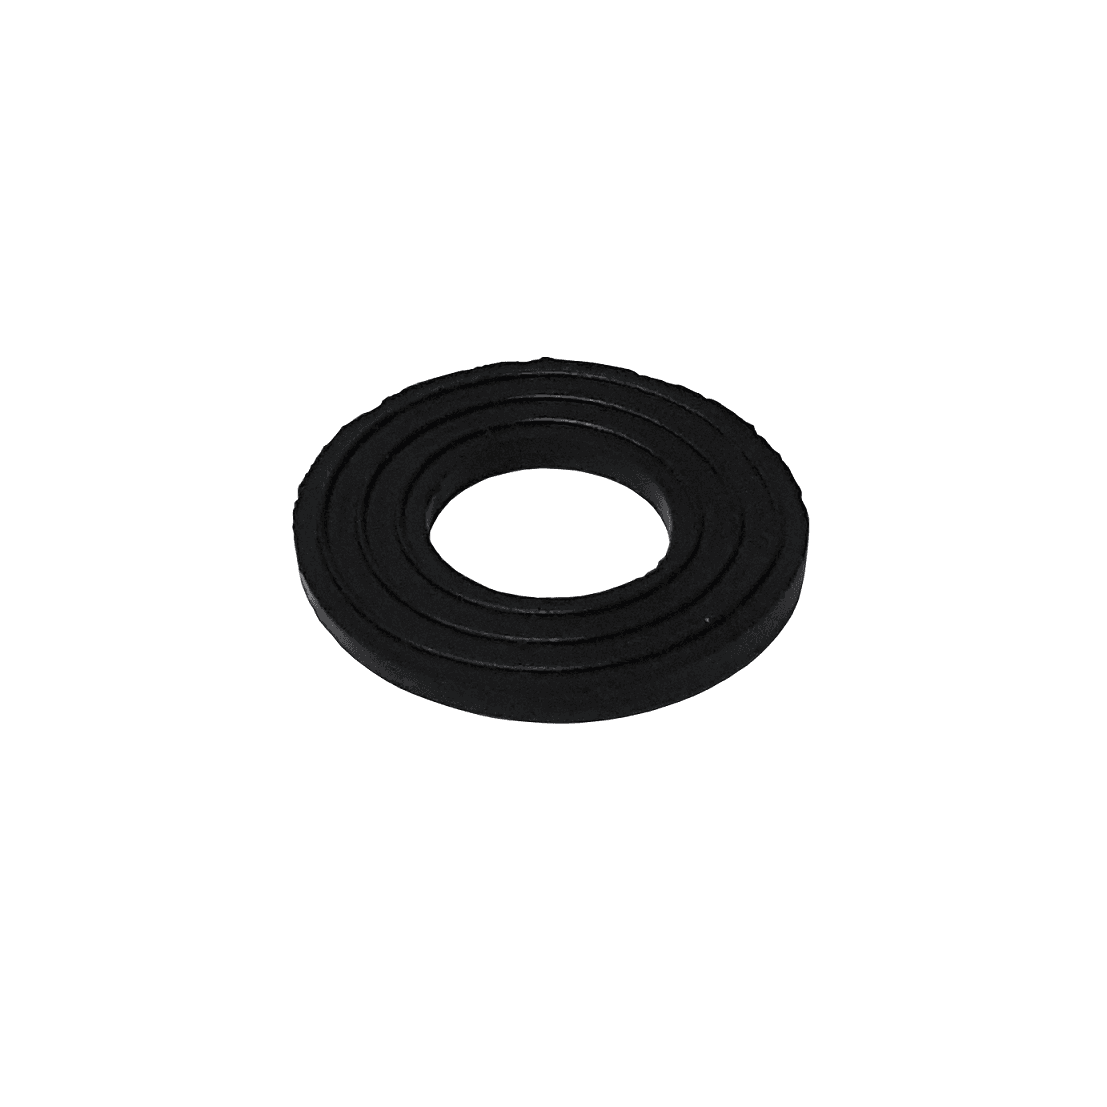 HUSKY 361-S (21 x 44 x 3mm Pillar Tap Support Rubber Washer)